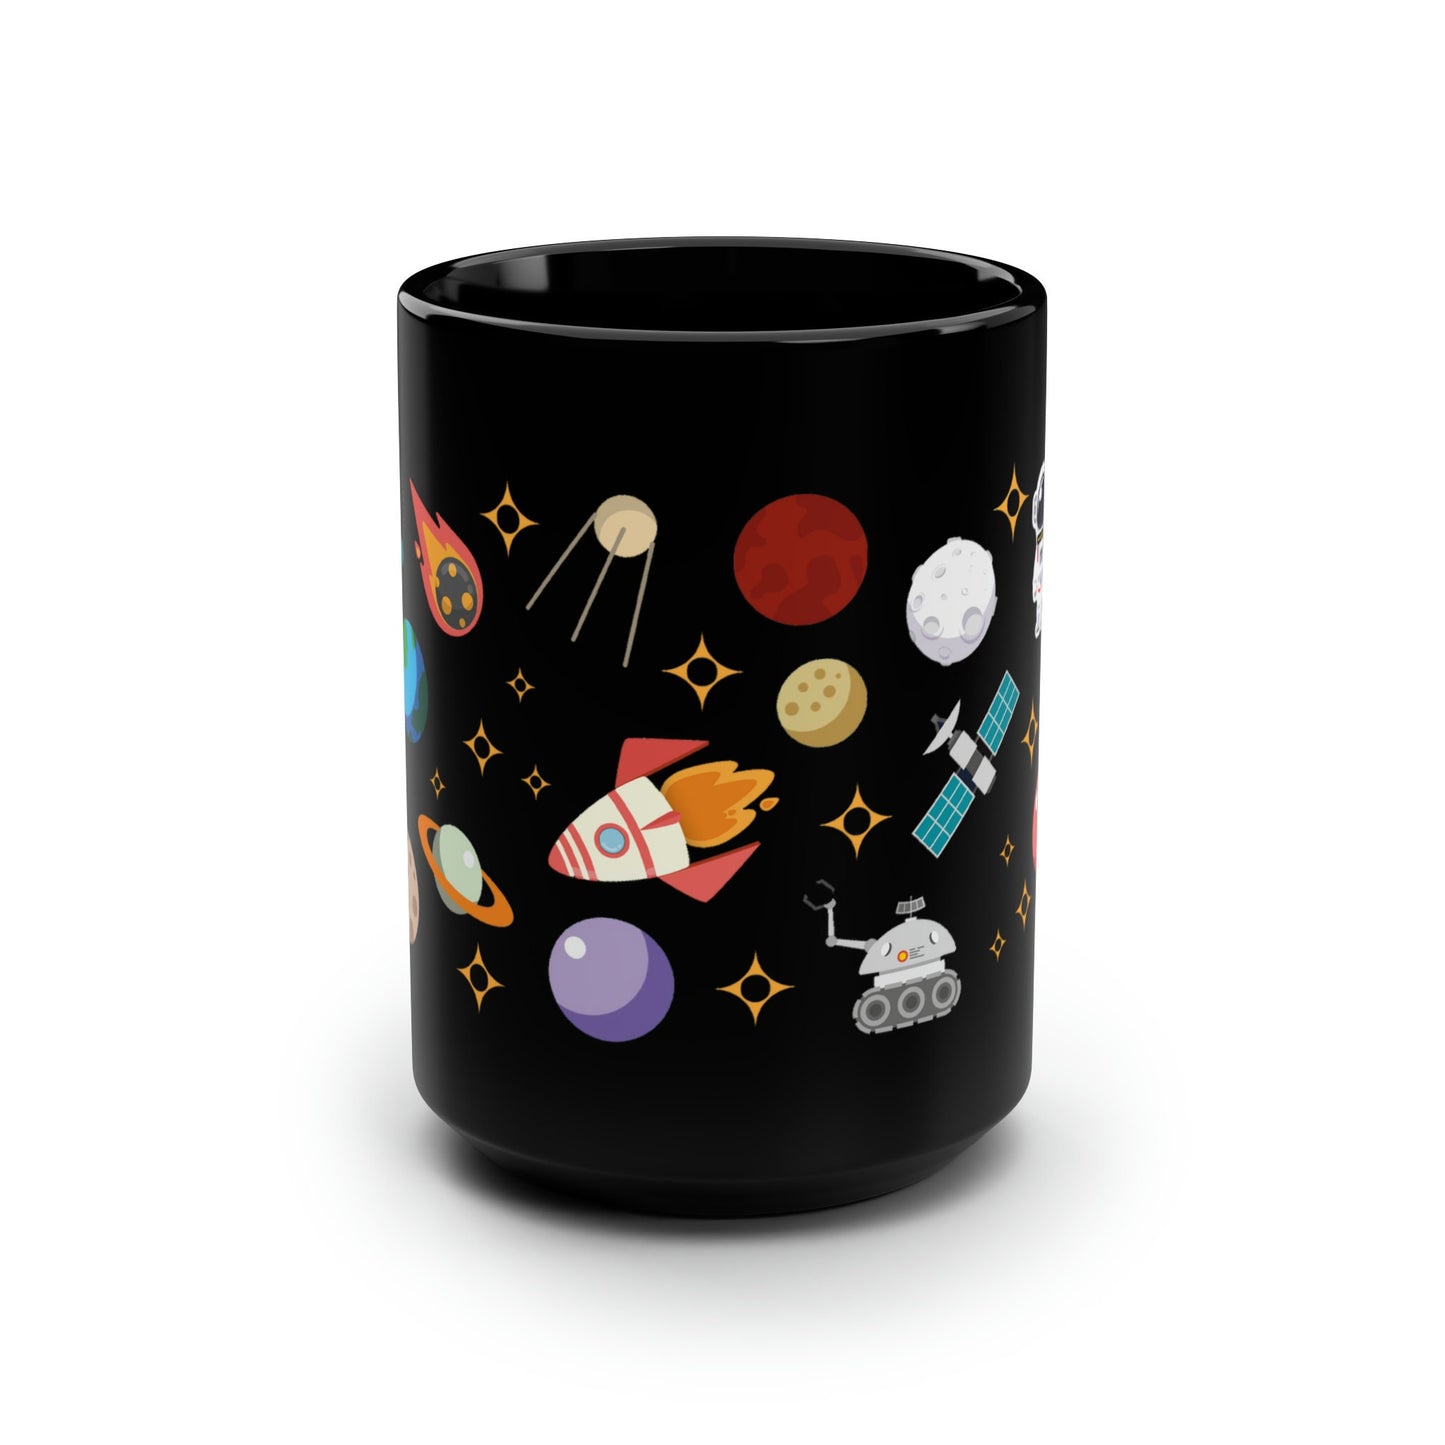 a black coffee mug with space and rockets on it